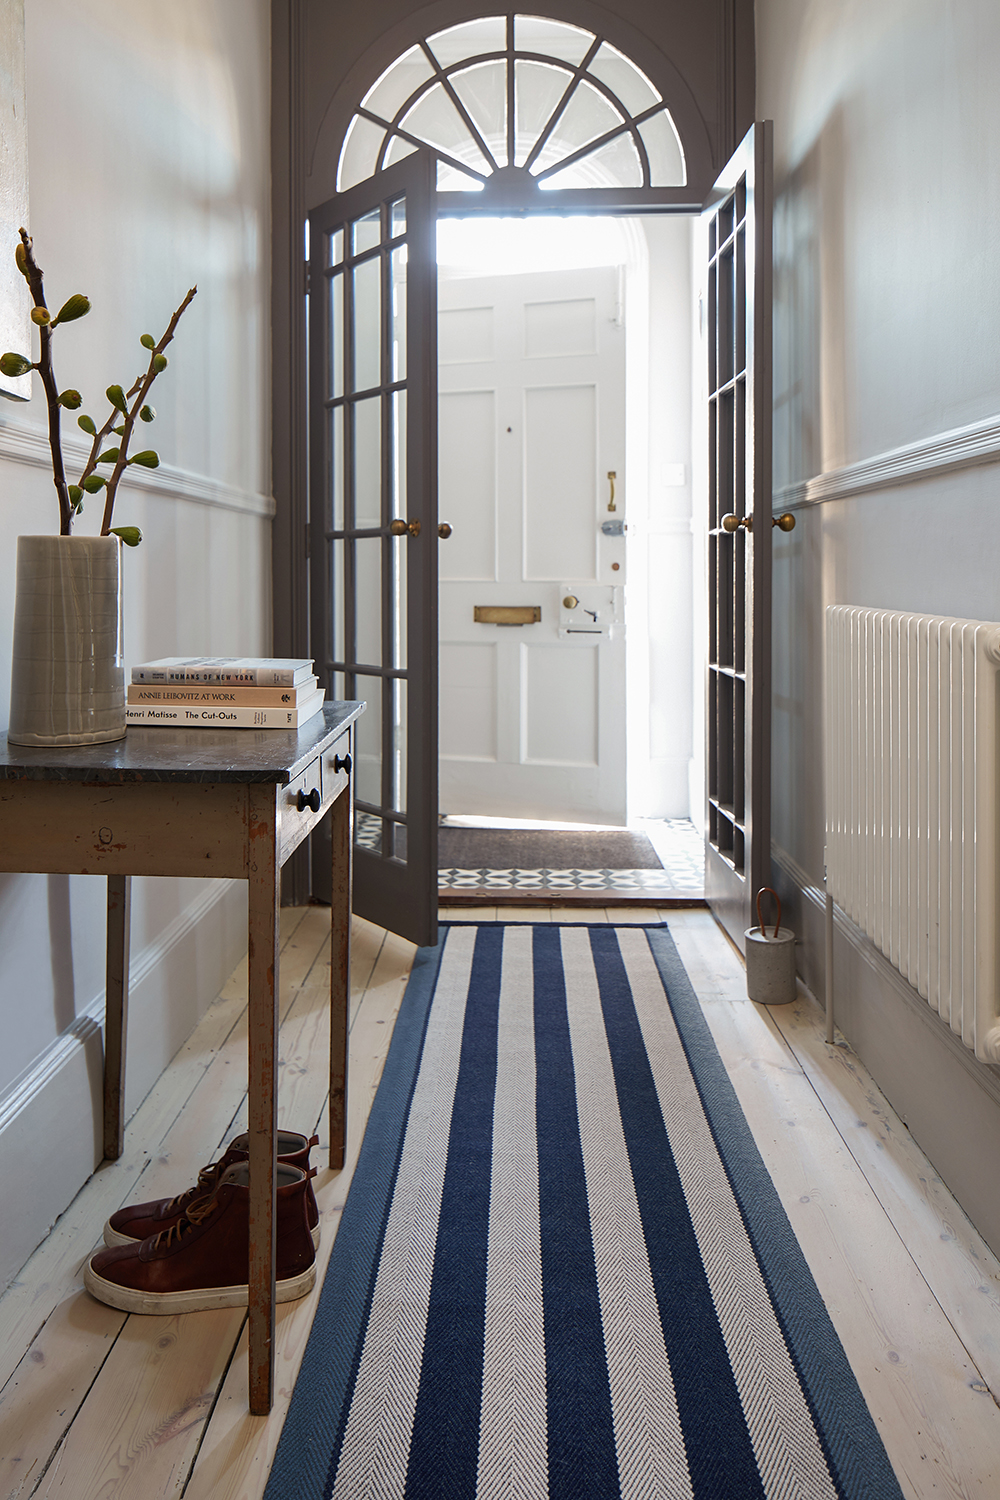 Hallway Rugs 10 Ideas To Add Style, Rug Runners For Hallways 10 Ft